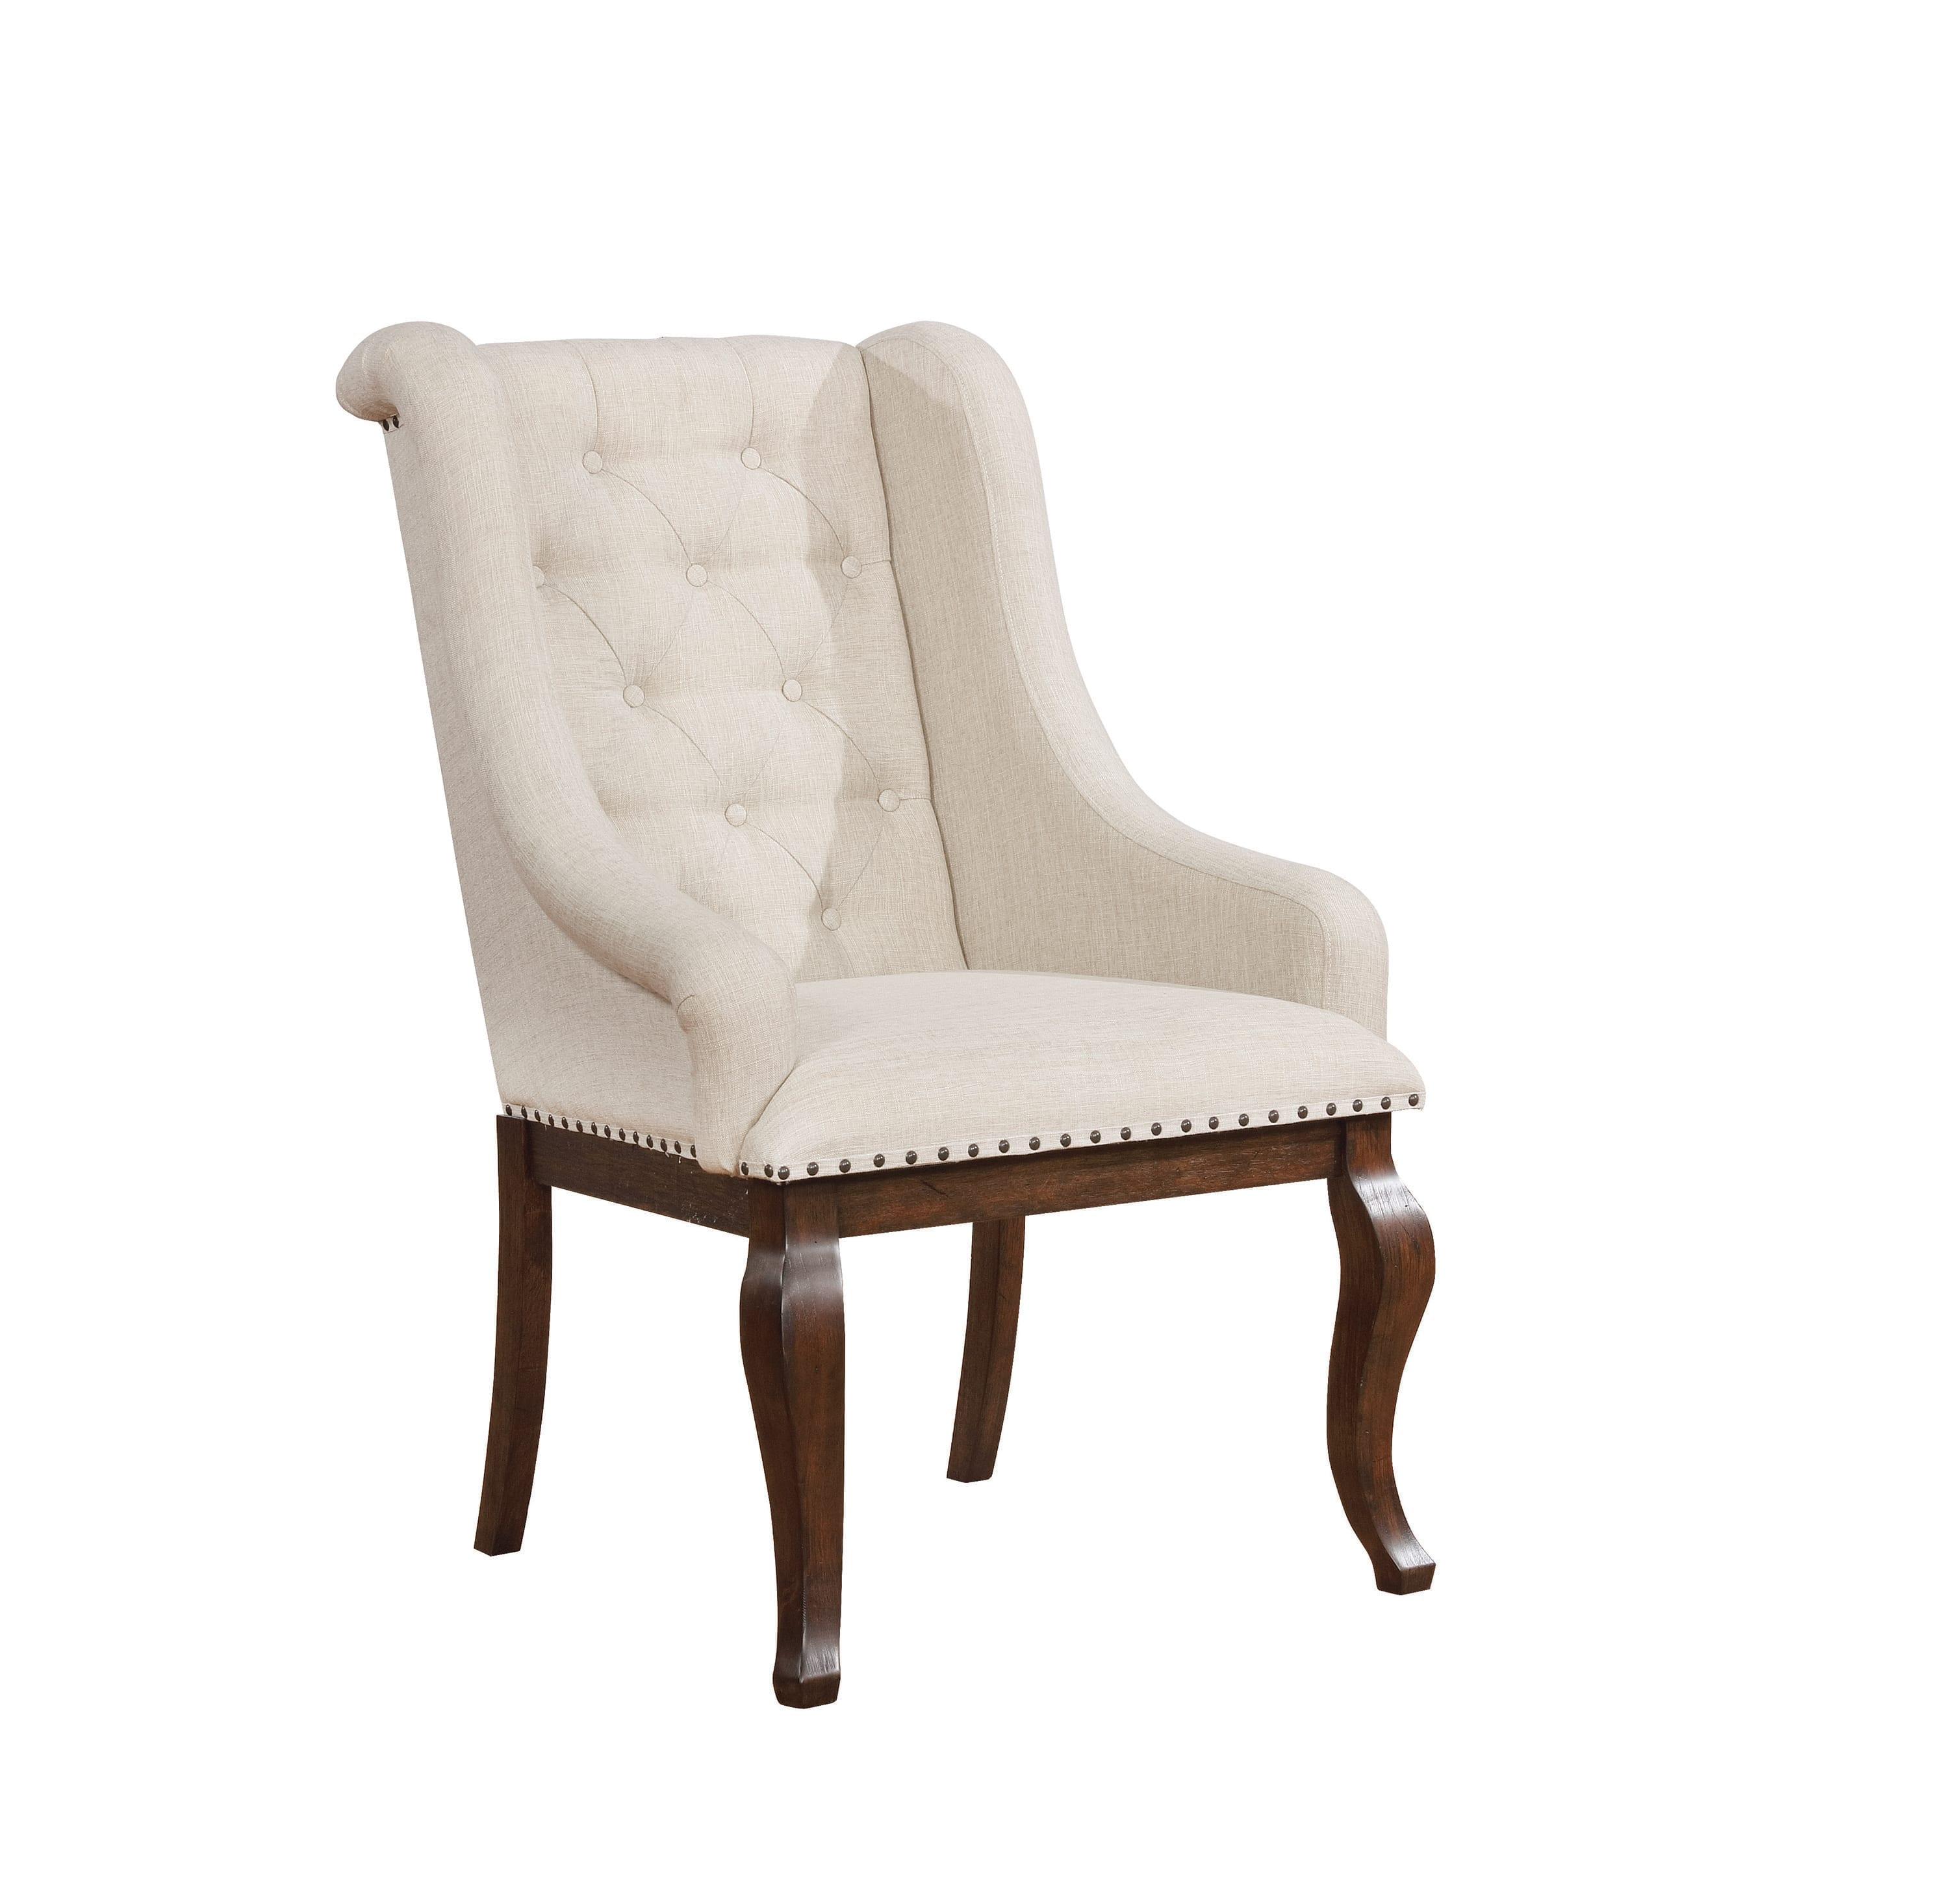 Traditional Arm Chair Glen Cove 107983 107983-Set-2 in Beige Fabric